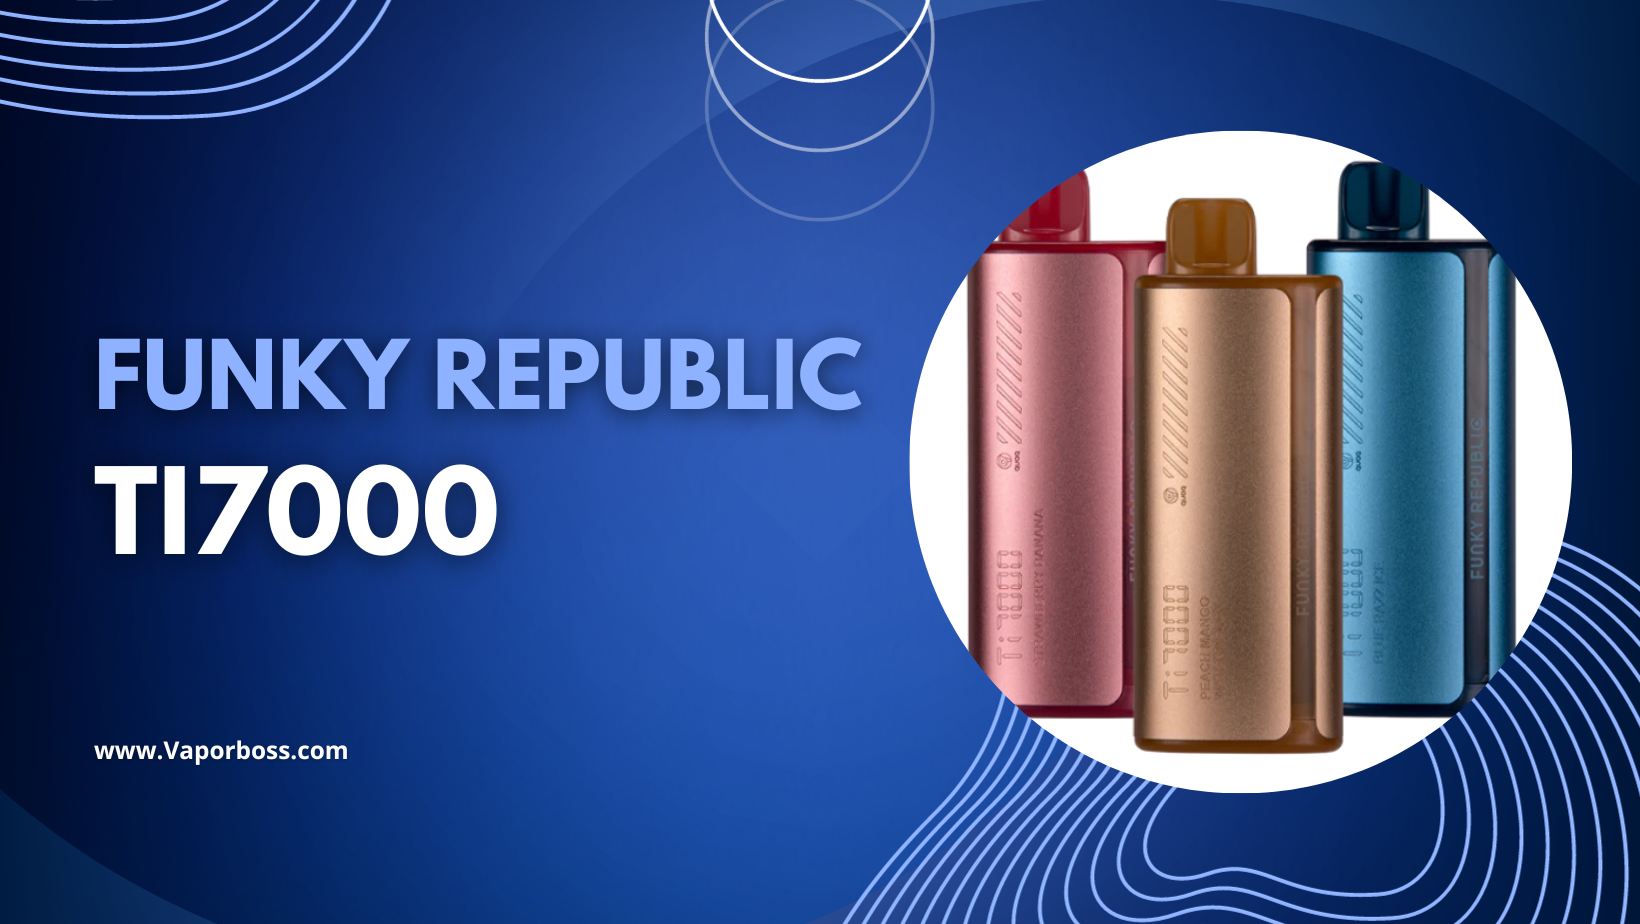 Get Your Passport To Flavorful Vaping With Funky Republic Ti7000